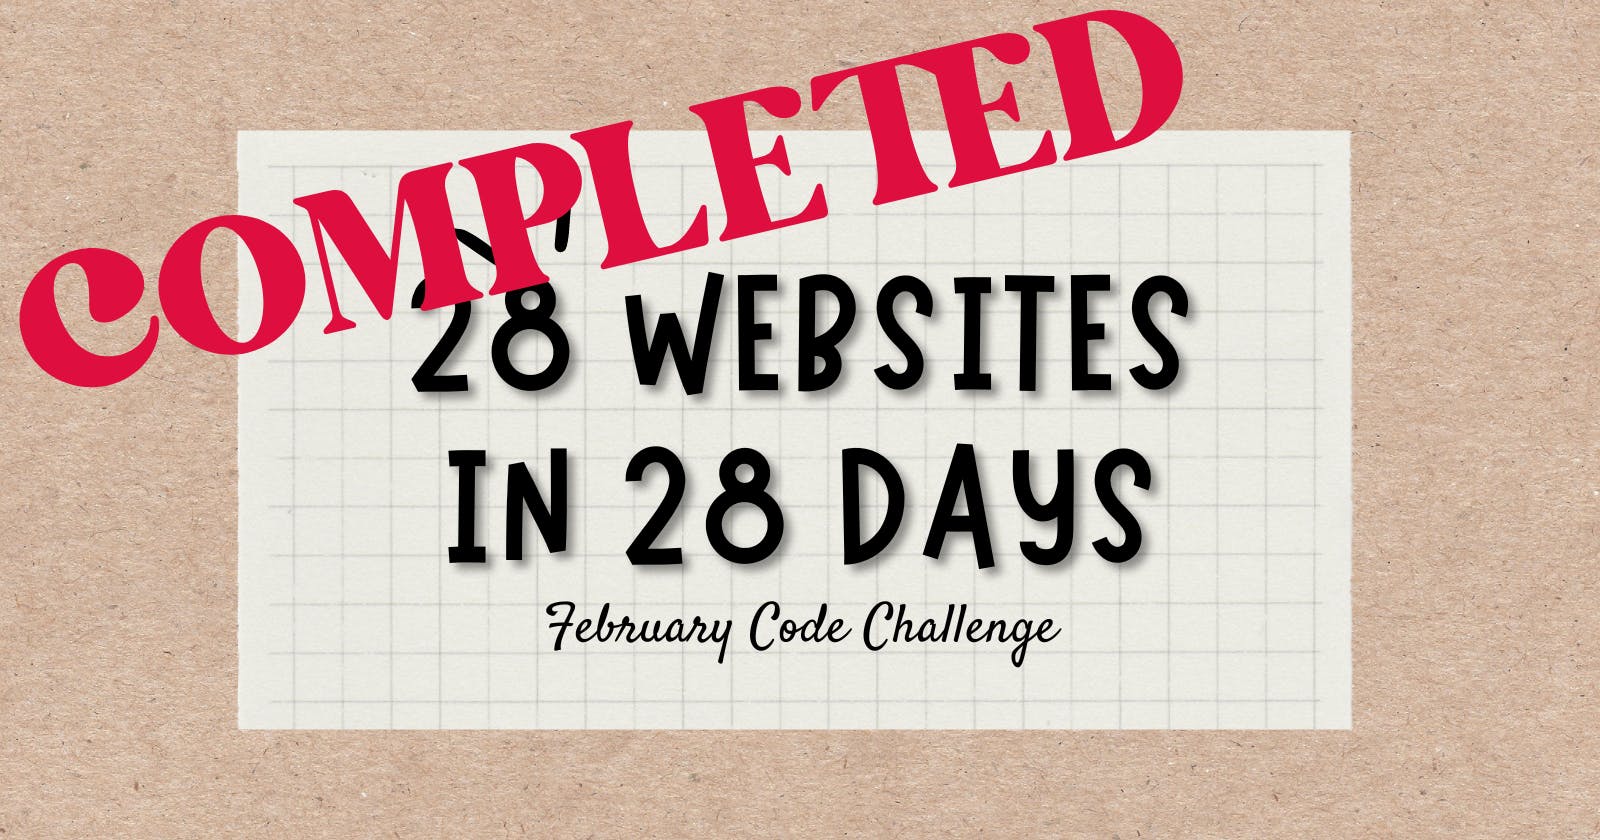 February Code Challenge COMPLETE!